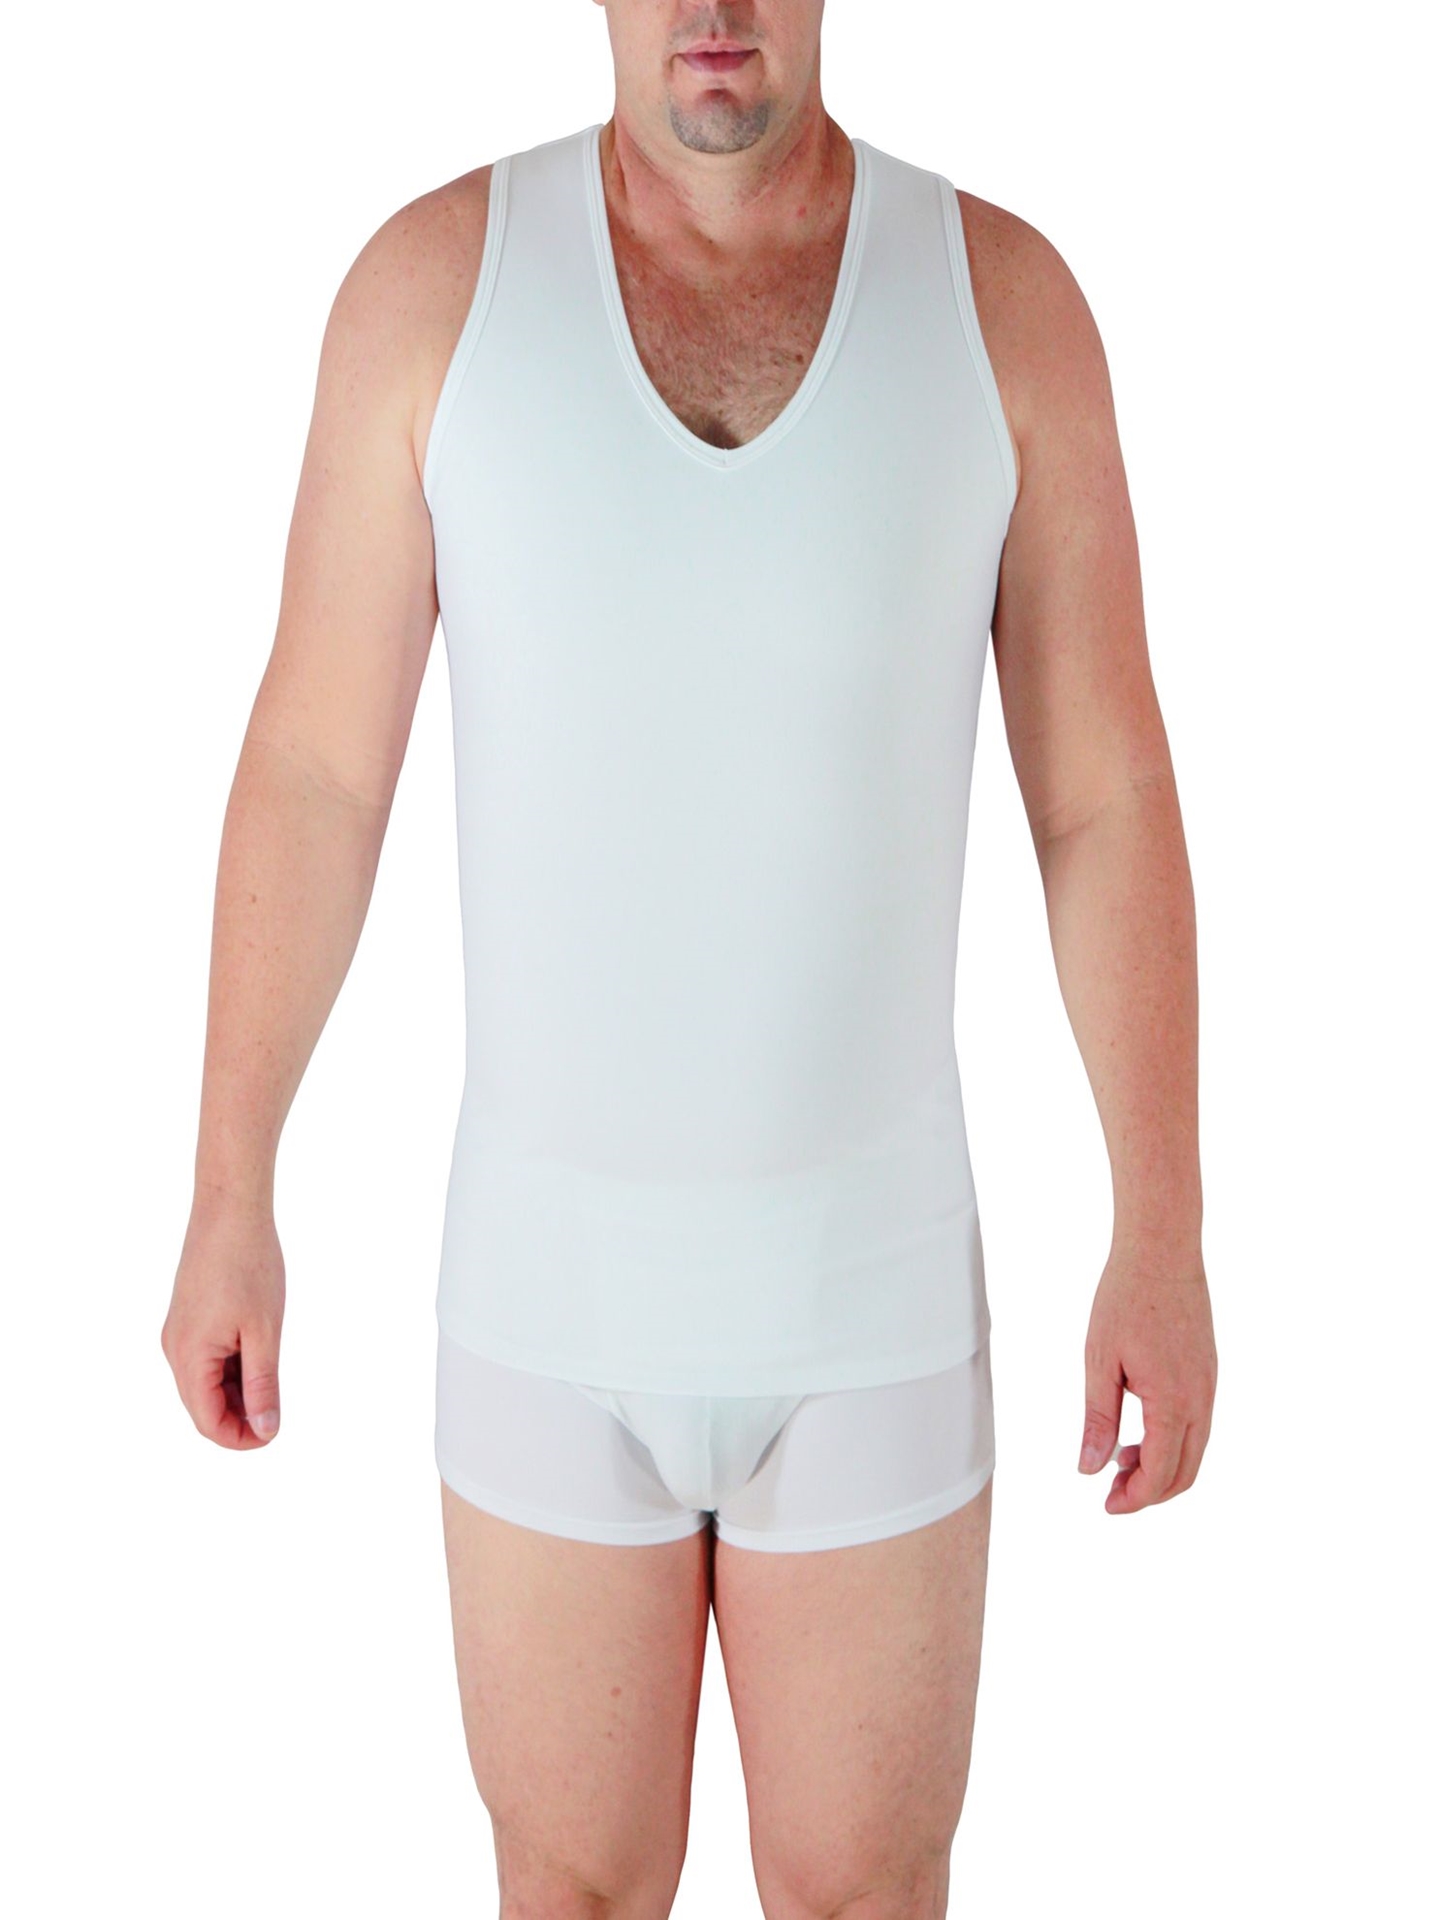 Underworks Mens Cotton Performance Compression Tank Top - for Workouts,  Slimming, and as Undershirt